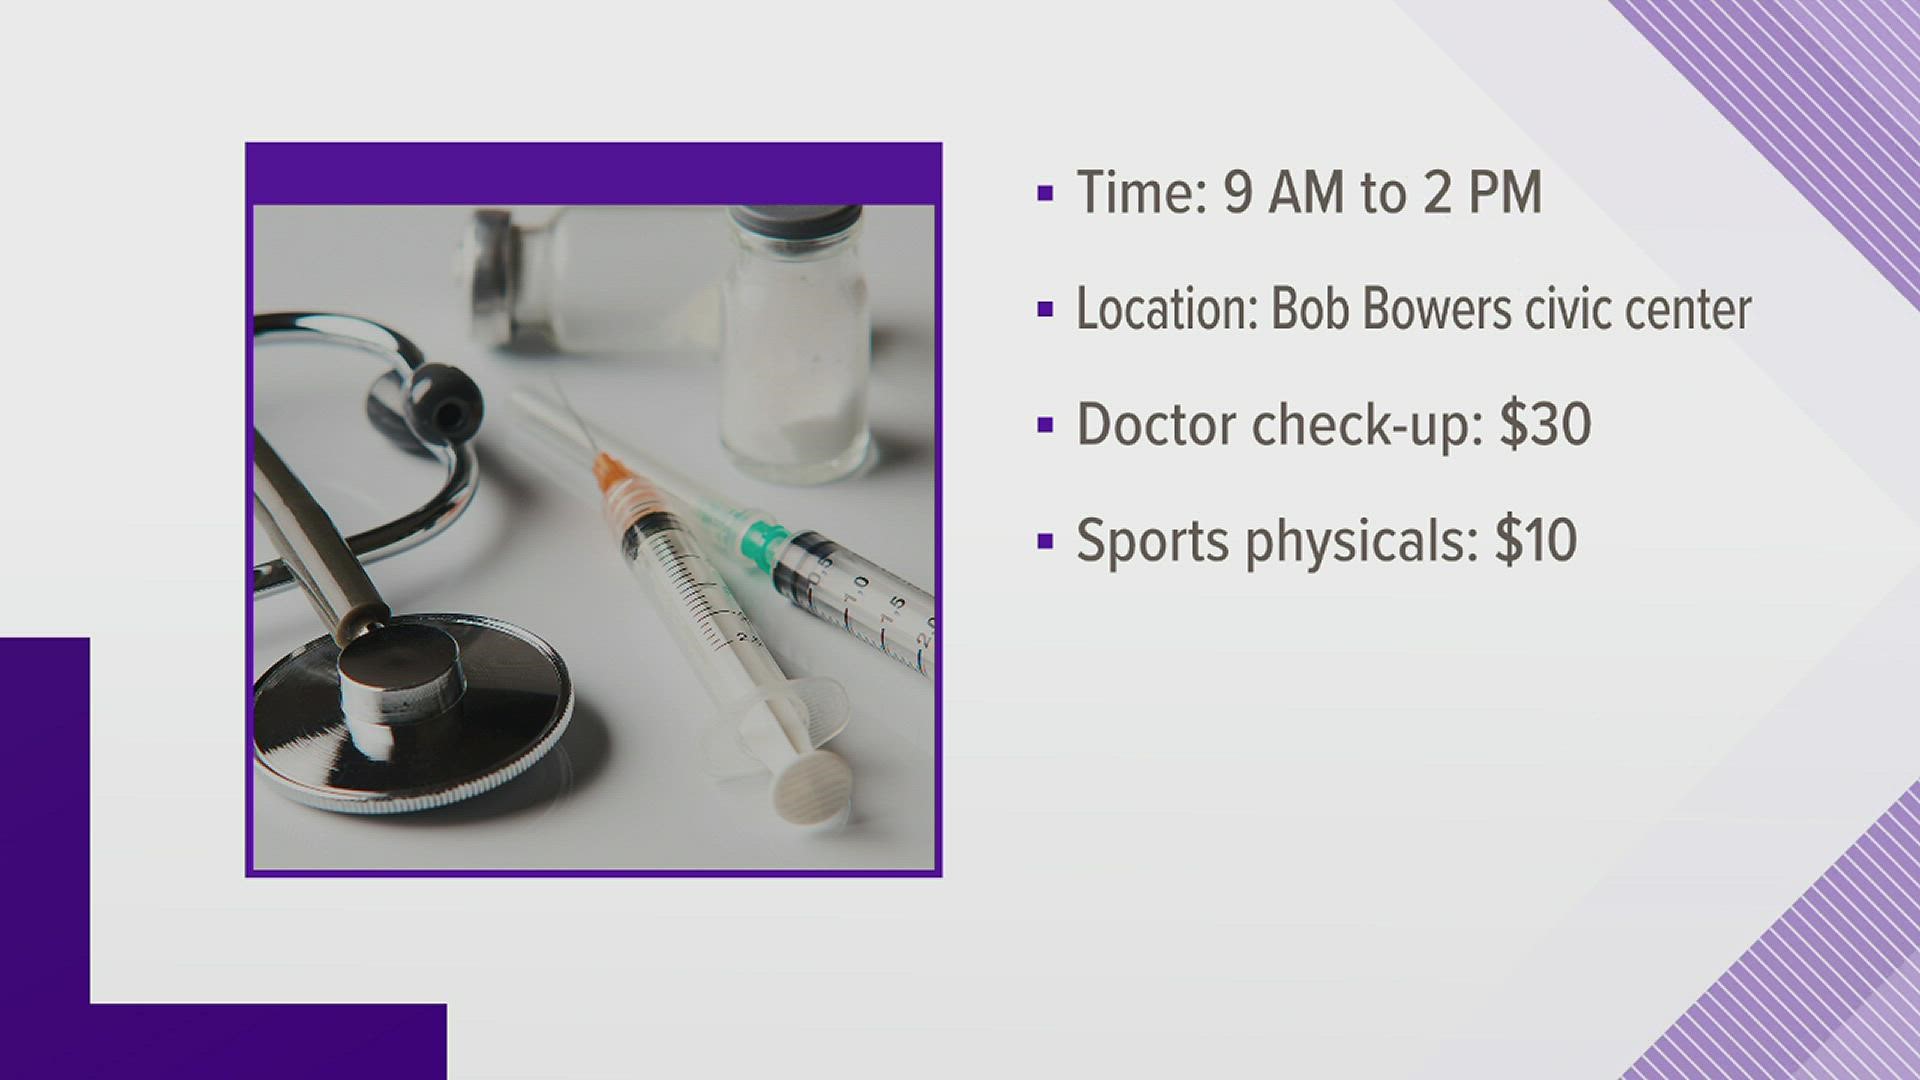 Patients without insurance may see a doctor for $30. Sports physicals are $10 without insurance.